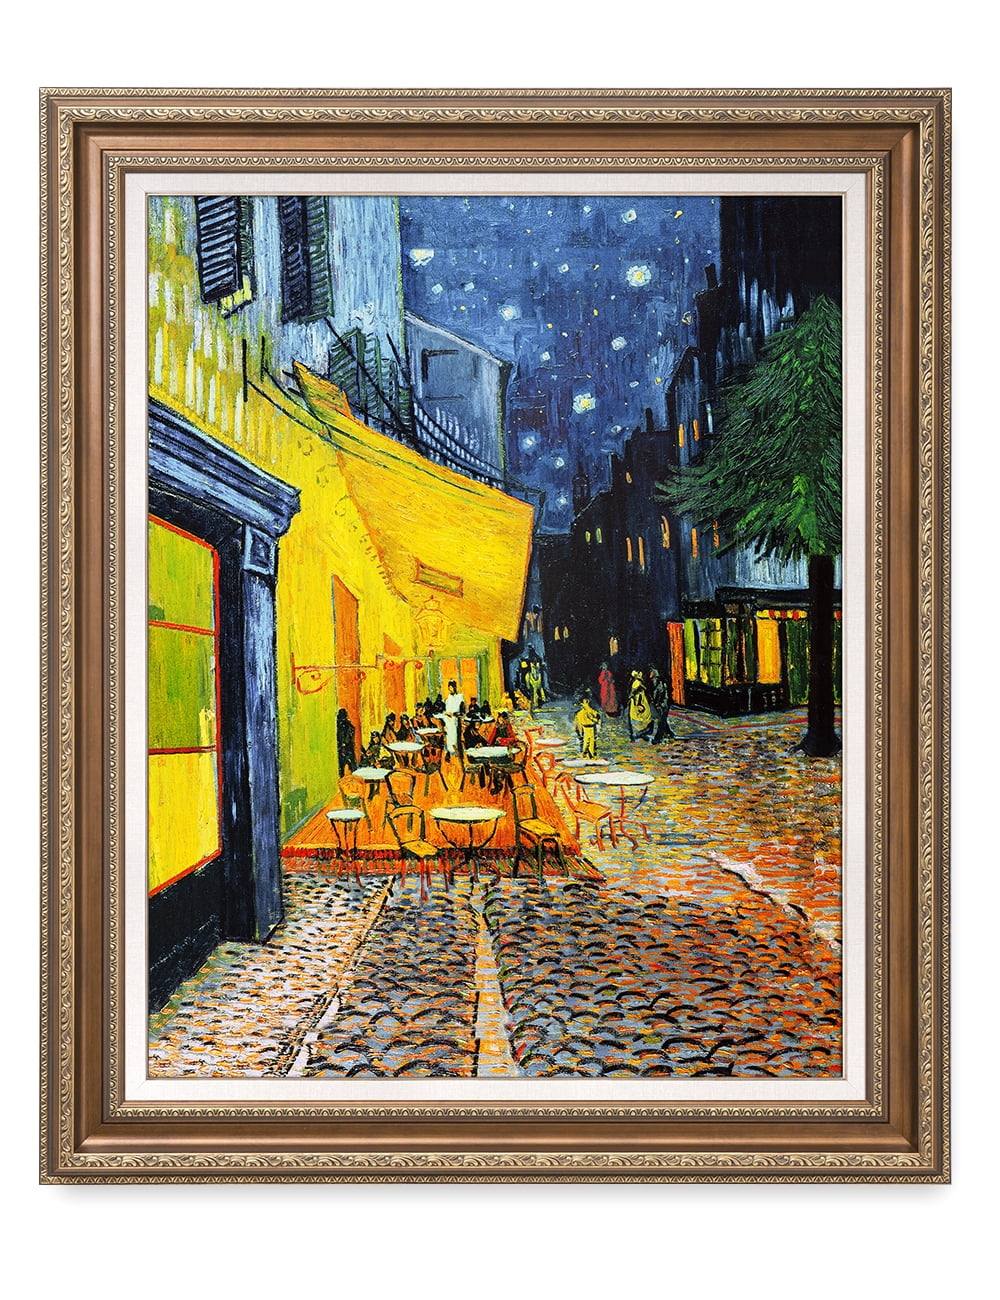 DECORARTS Cafe Terrace At Night, Vincent Van Gogh Classic Art. Giclee  Prints Framed Art for Wall Decor. Framed size: 28.75x34.75